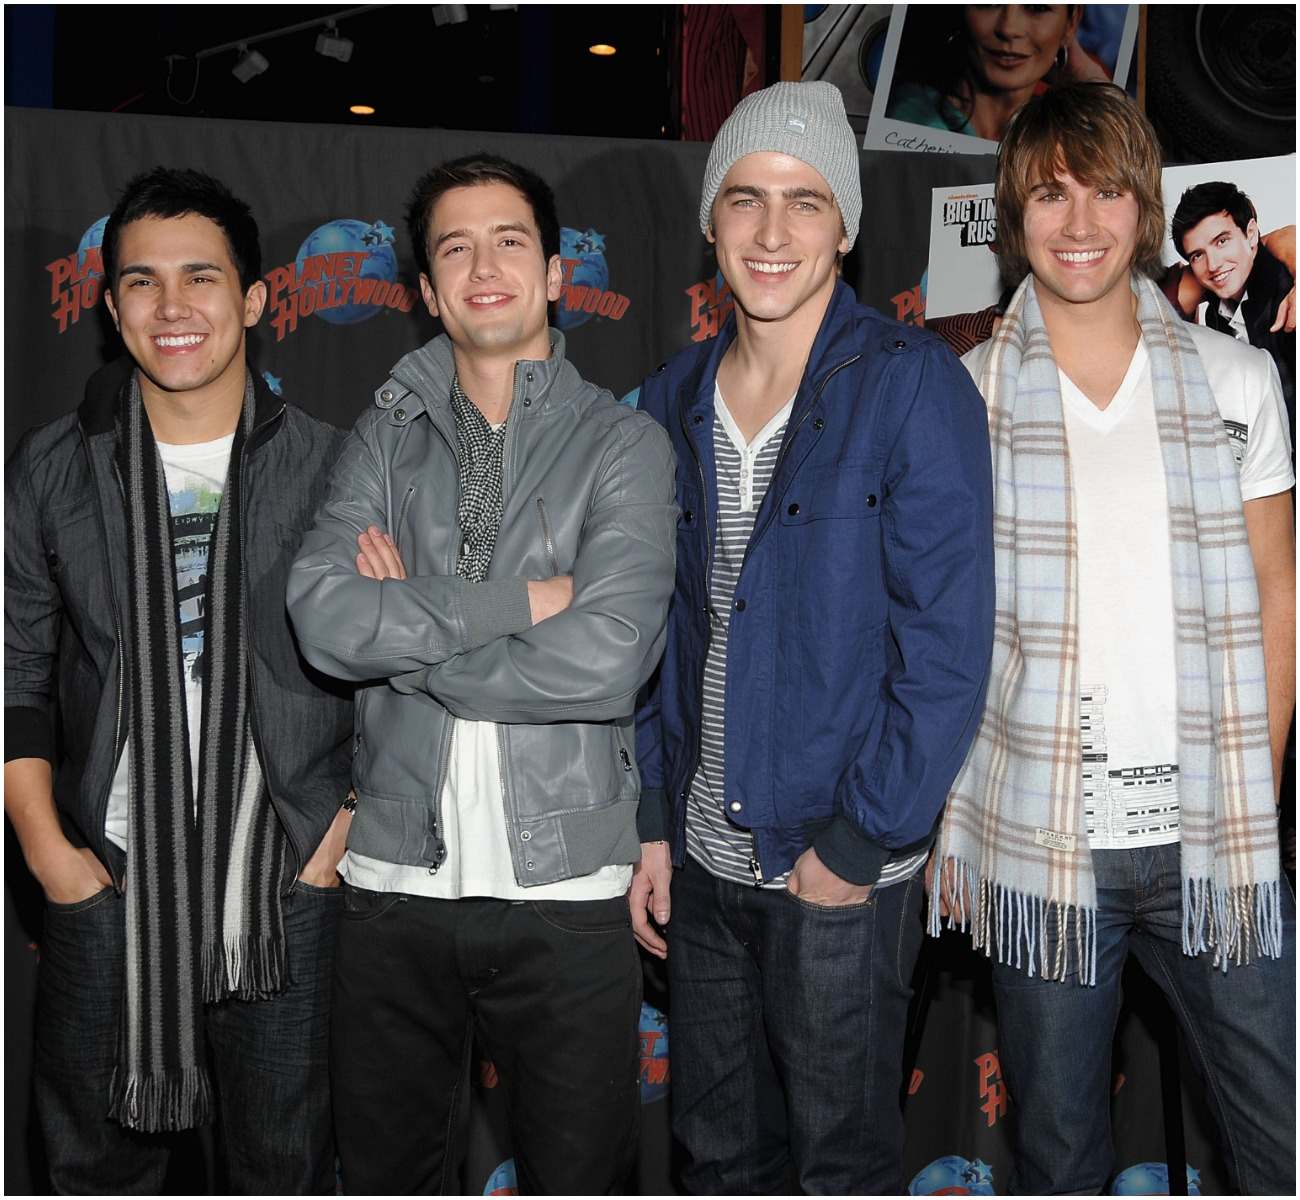 Logan Henderson wit the rest of the Big Time Rush band members